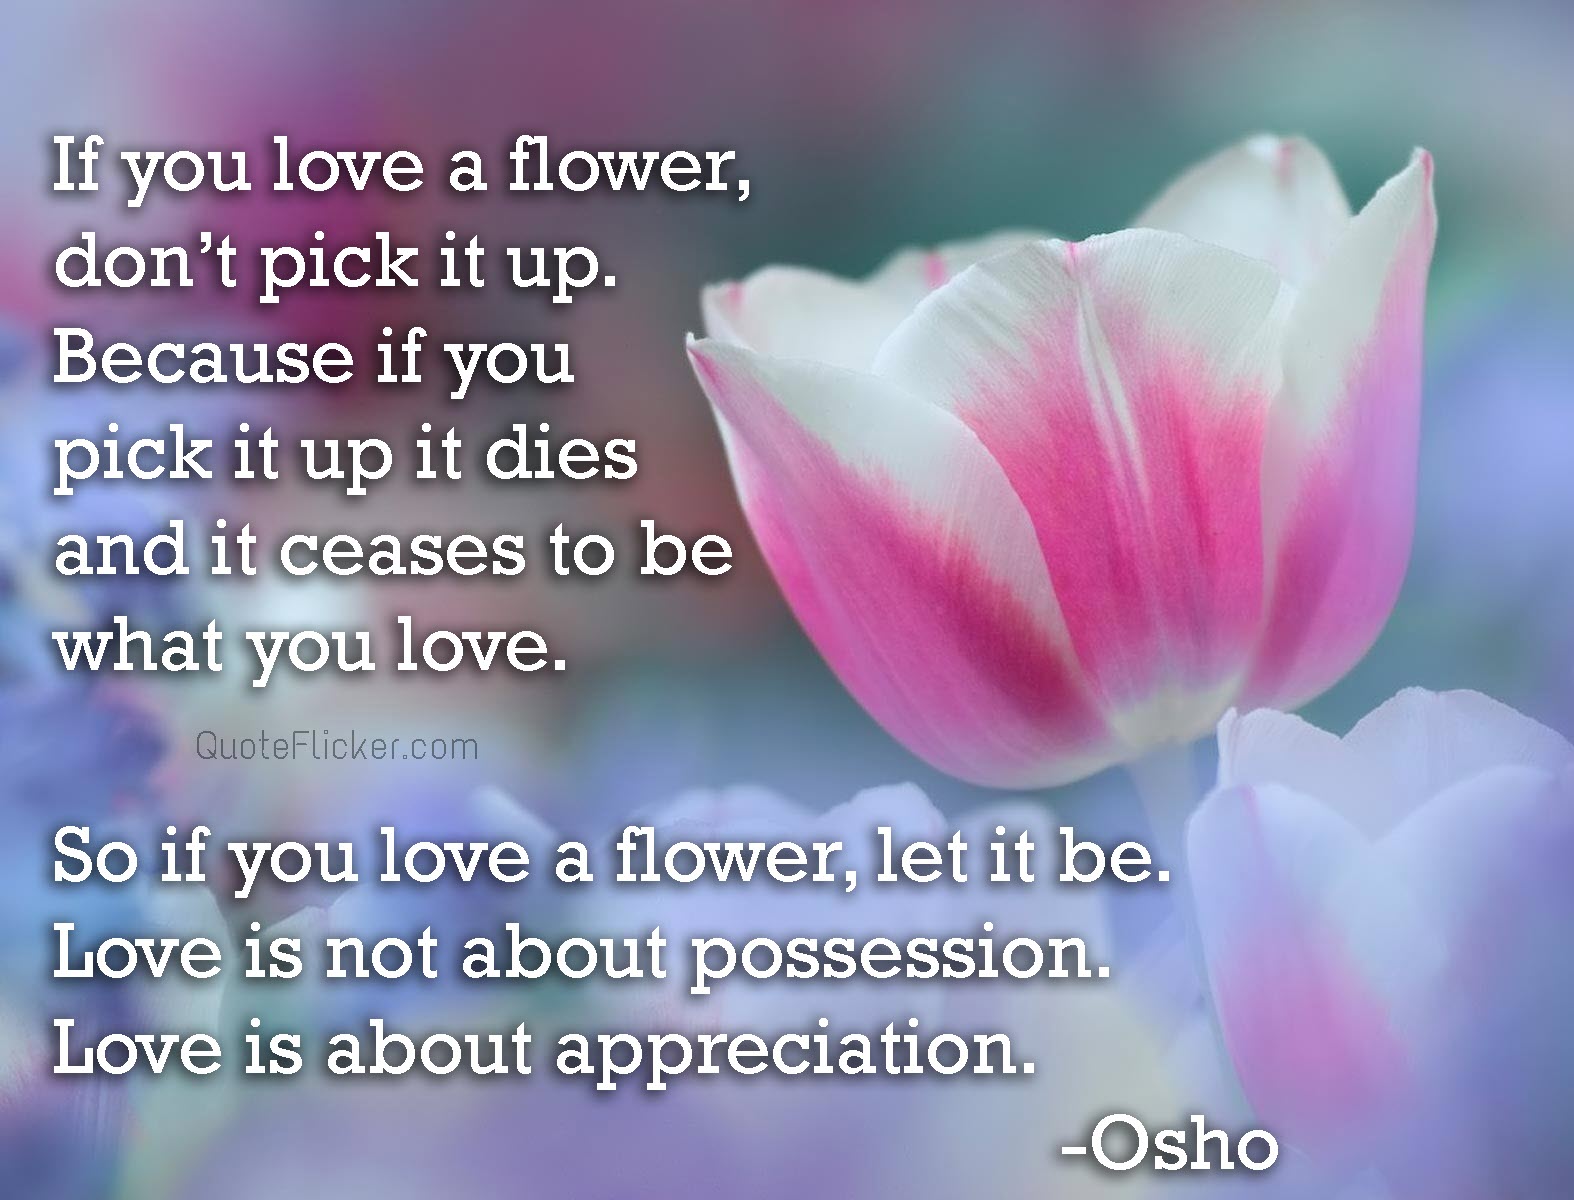 So if you love a flower let it be Love is not about possession Love is about appreciation